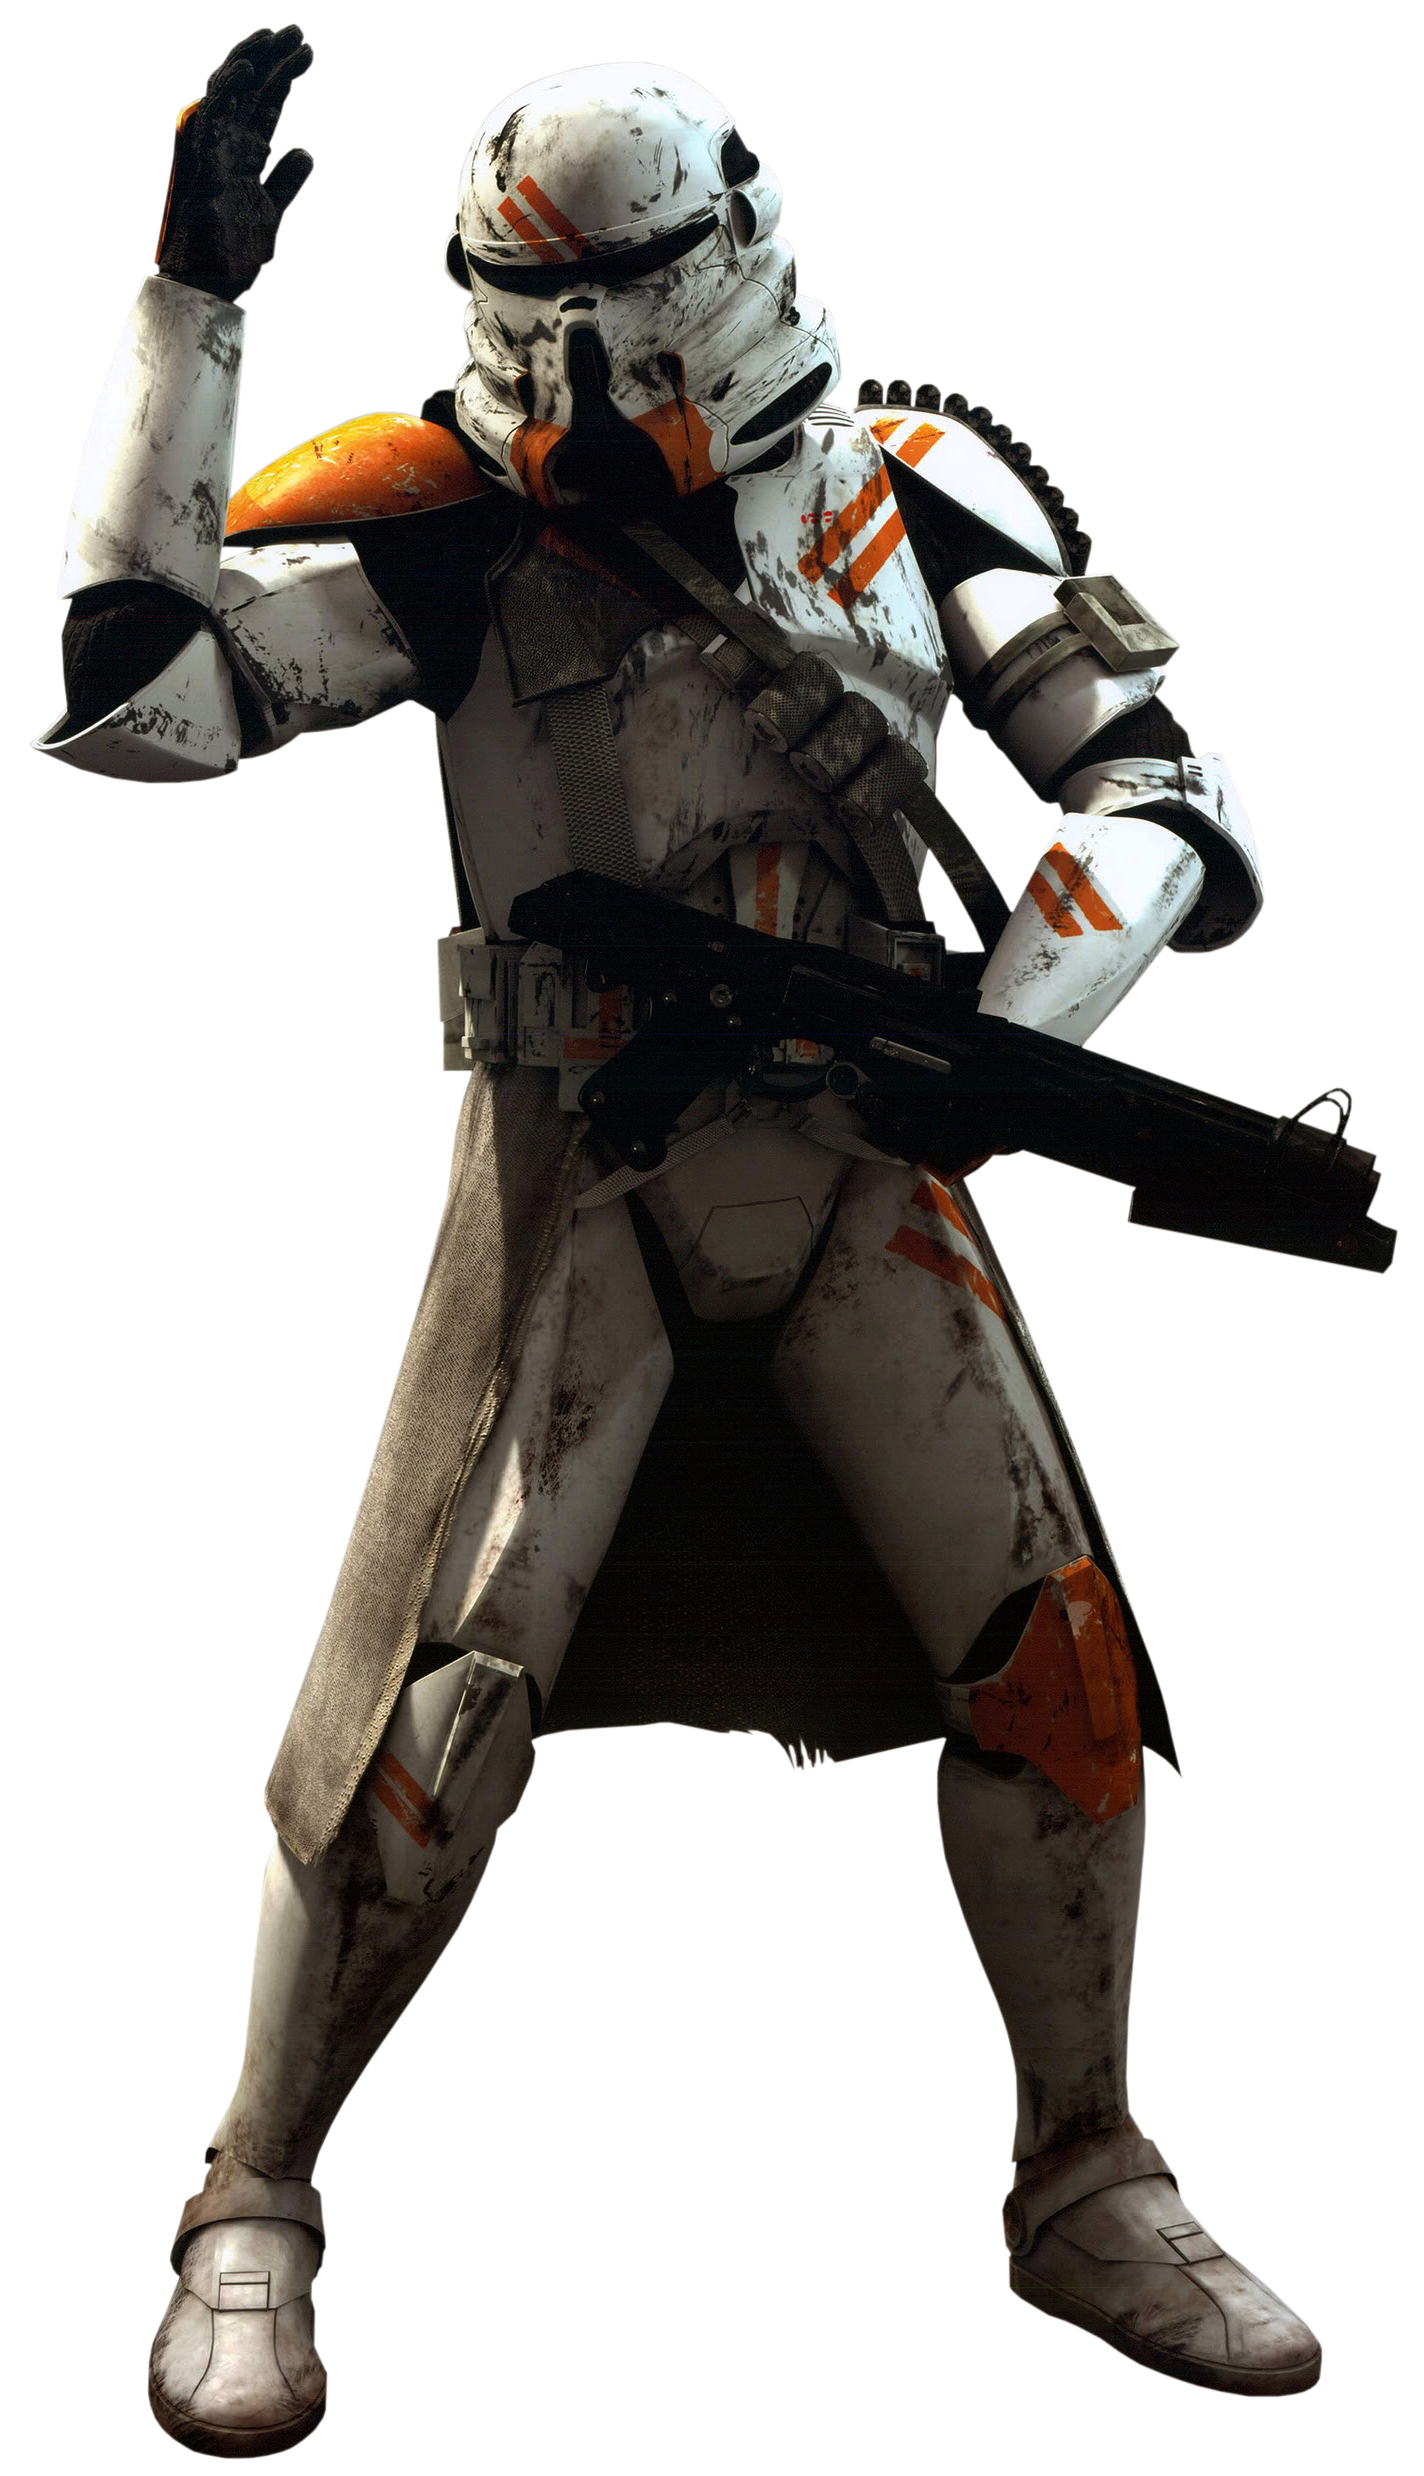 Star Clone Wars Figurine Costume Stormtrooper The PNG Image